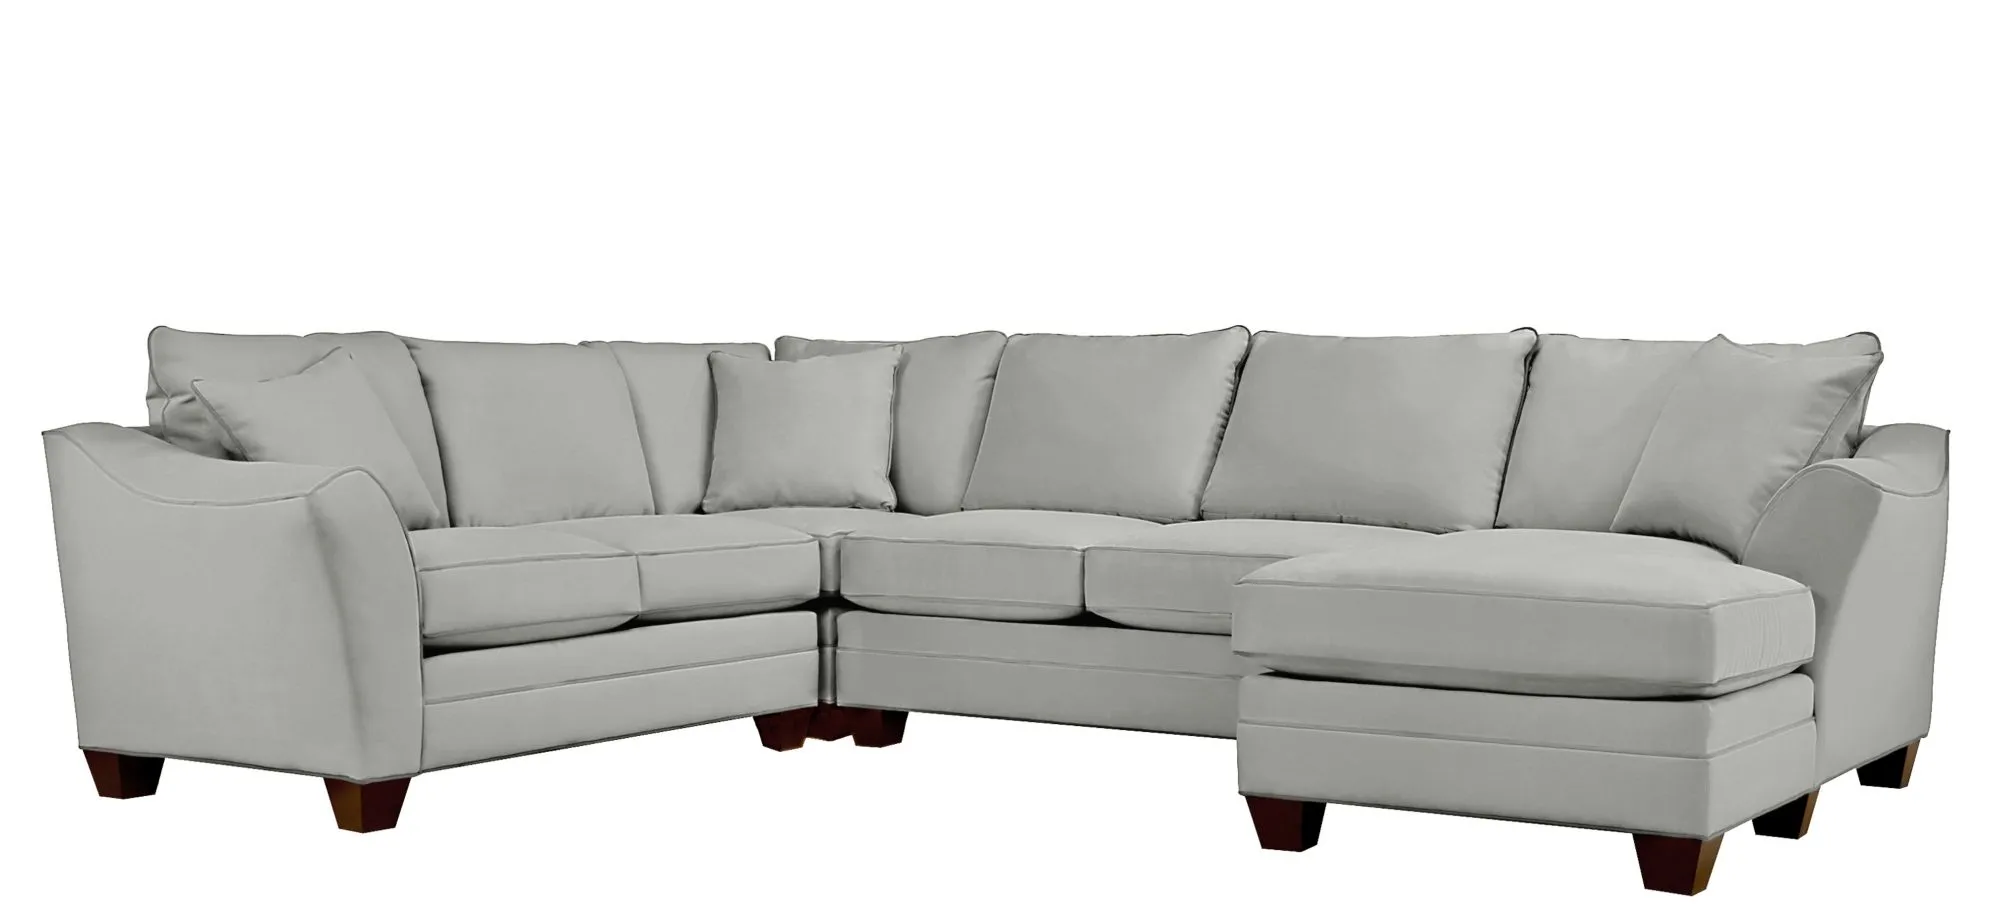 Foresthill 4-pc. Sectional w/ Right Arm Facing Chaise in Suede So Soft Platinum by H.M. Richards